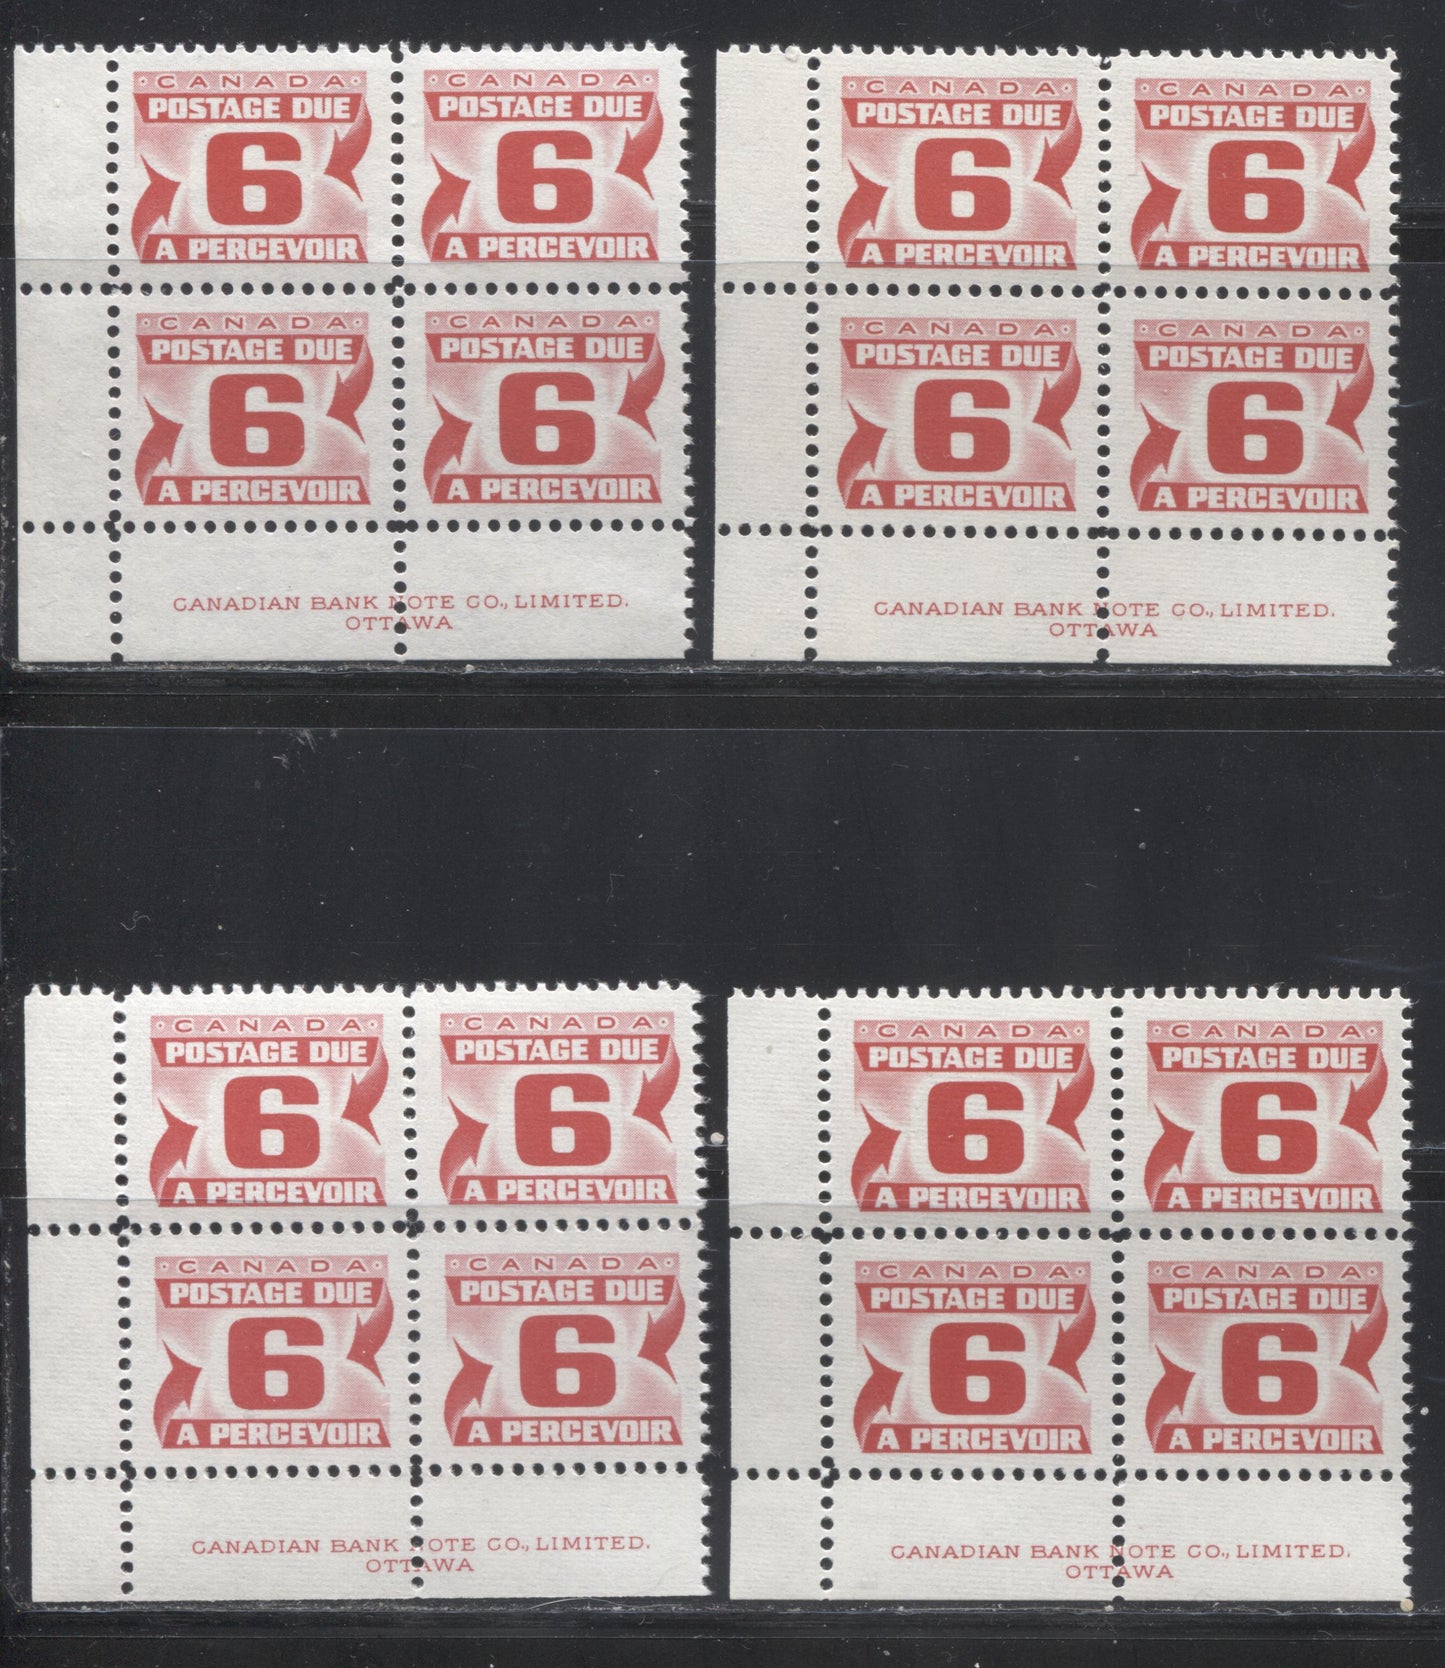 Lot 102 Canada #J33,i,iii 6c Carmine Rose 1973-1977, 3rd Centennial Postage Due Issue, Four VFNH LL Inscription Blocks Of 4 On LF-fl & DF Ivory, Bluish & Bluish White Ribbed Papers With PVA Gum, Perf 12